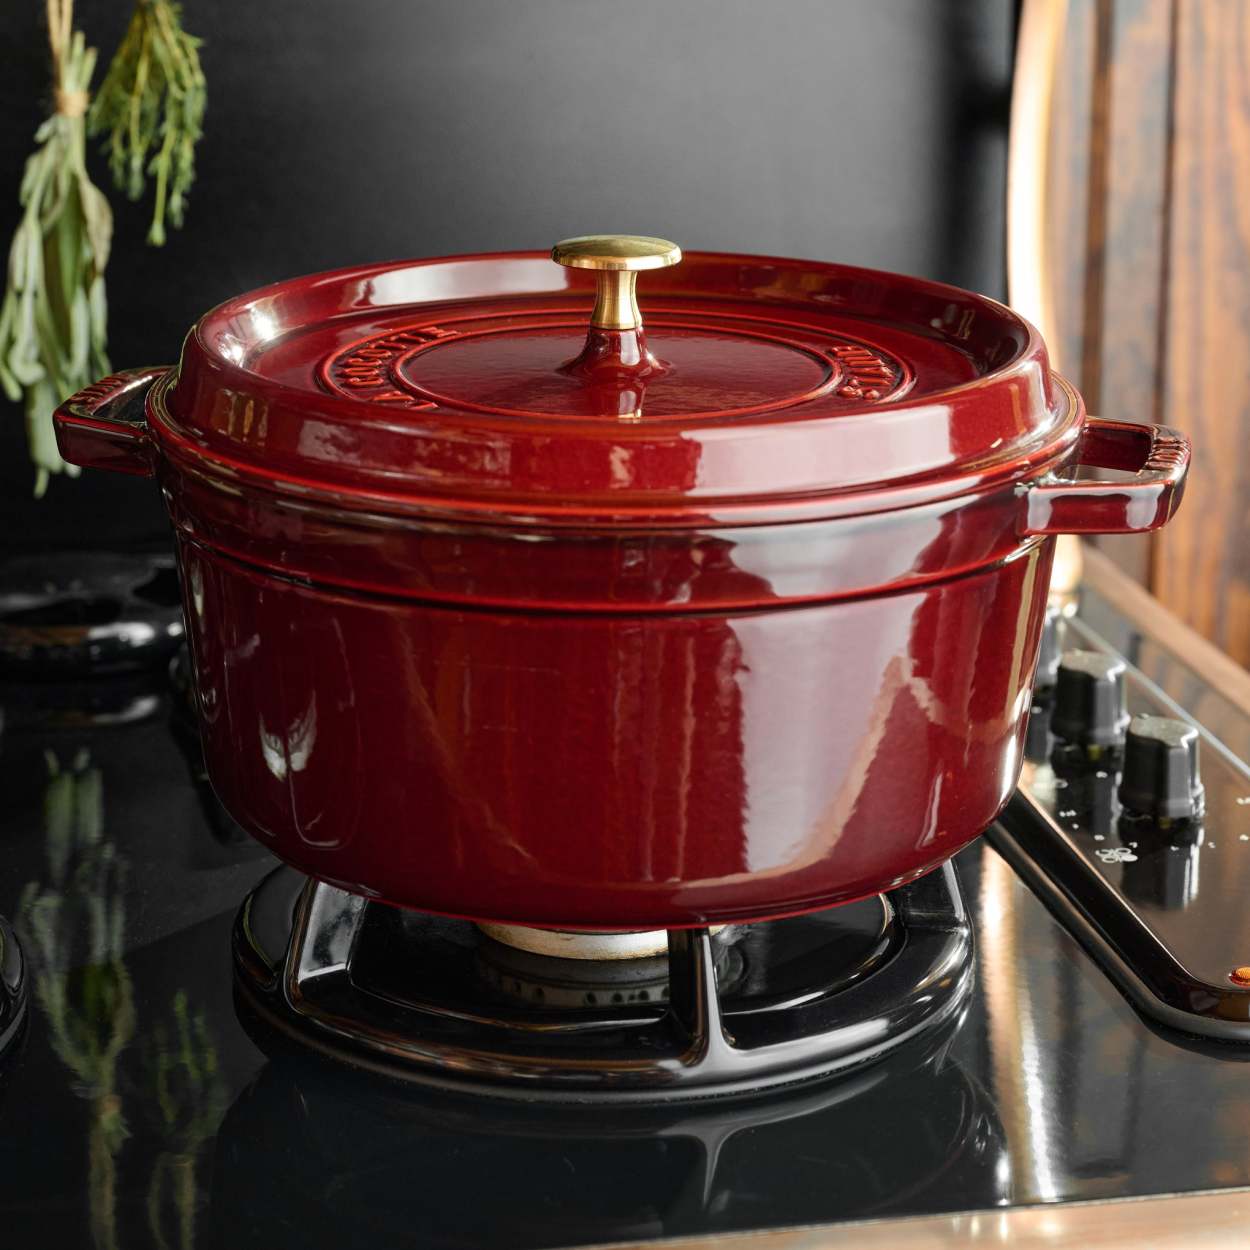 Le Creuset vs. Staub Dutch Ovens: Which One Should You Buy?